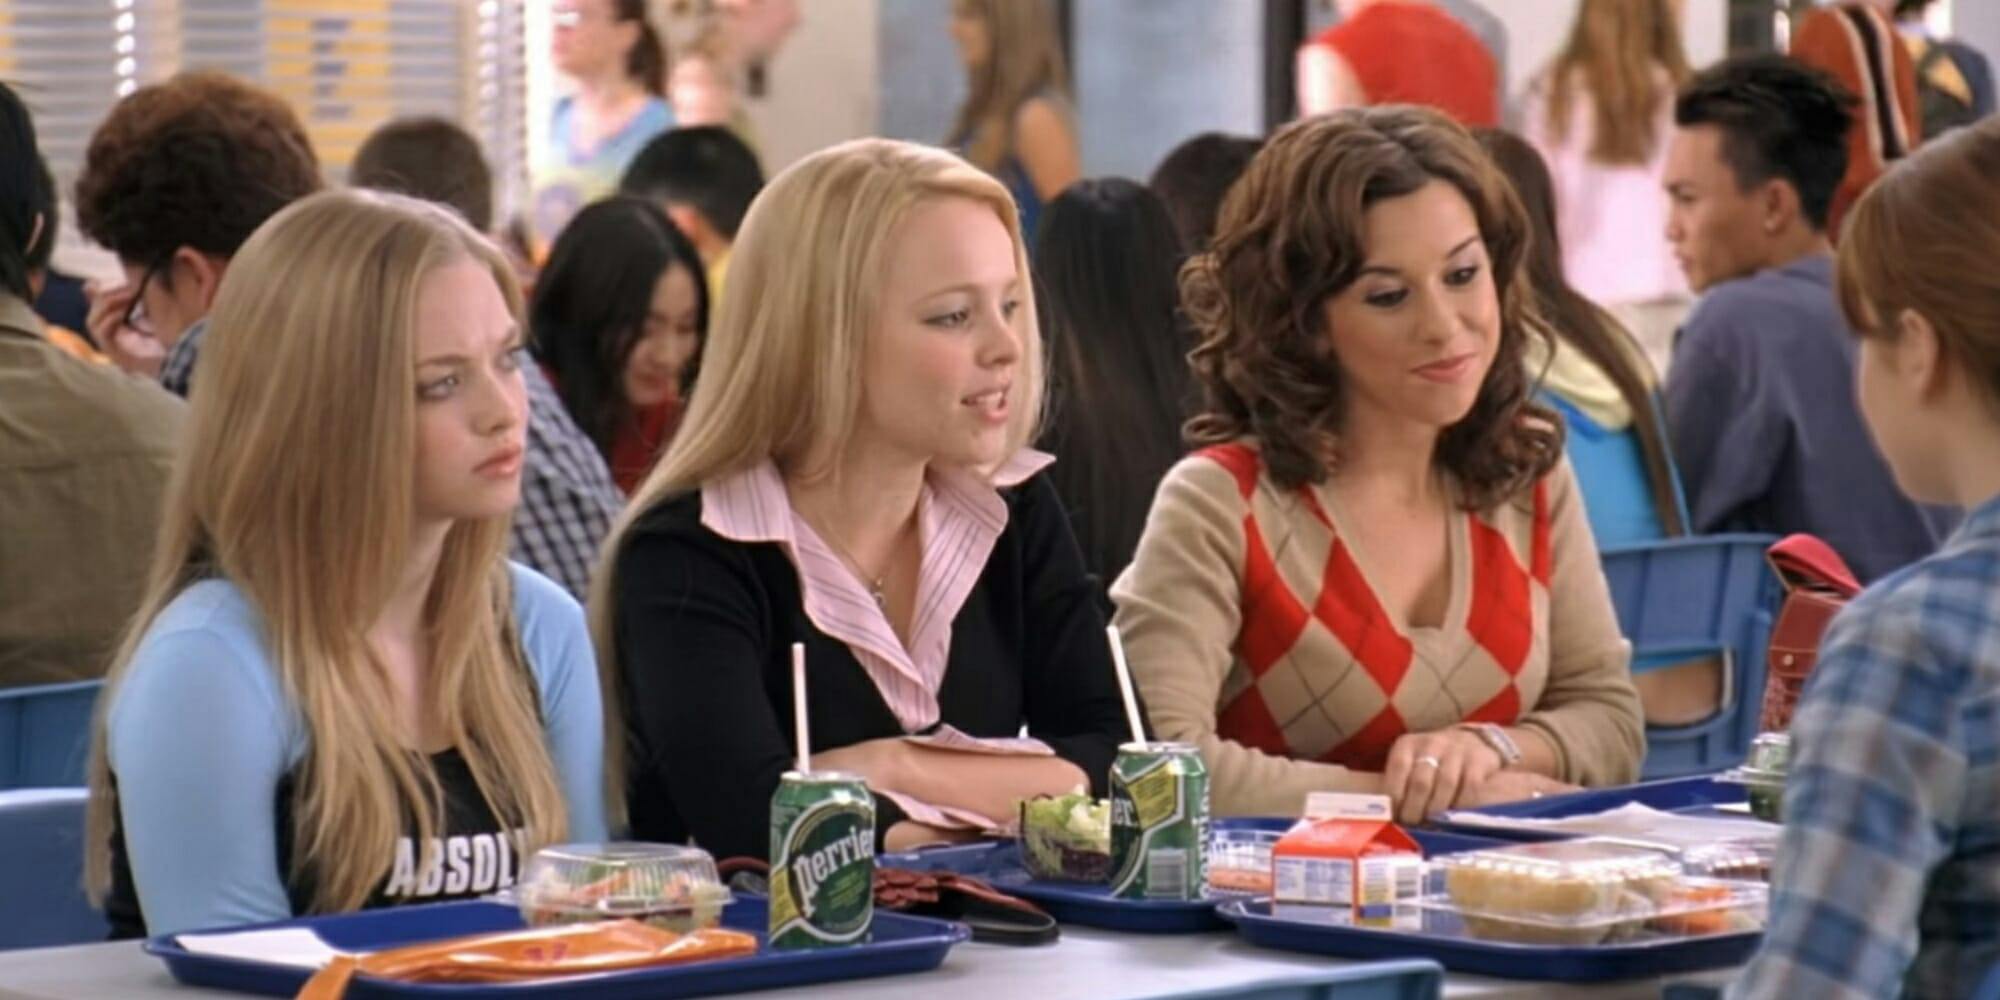 Mean Girls Day October 3 Is A Wednesday So Twitter Is Wearing Pink 4152